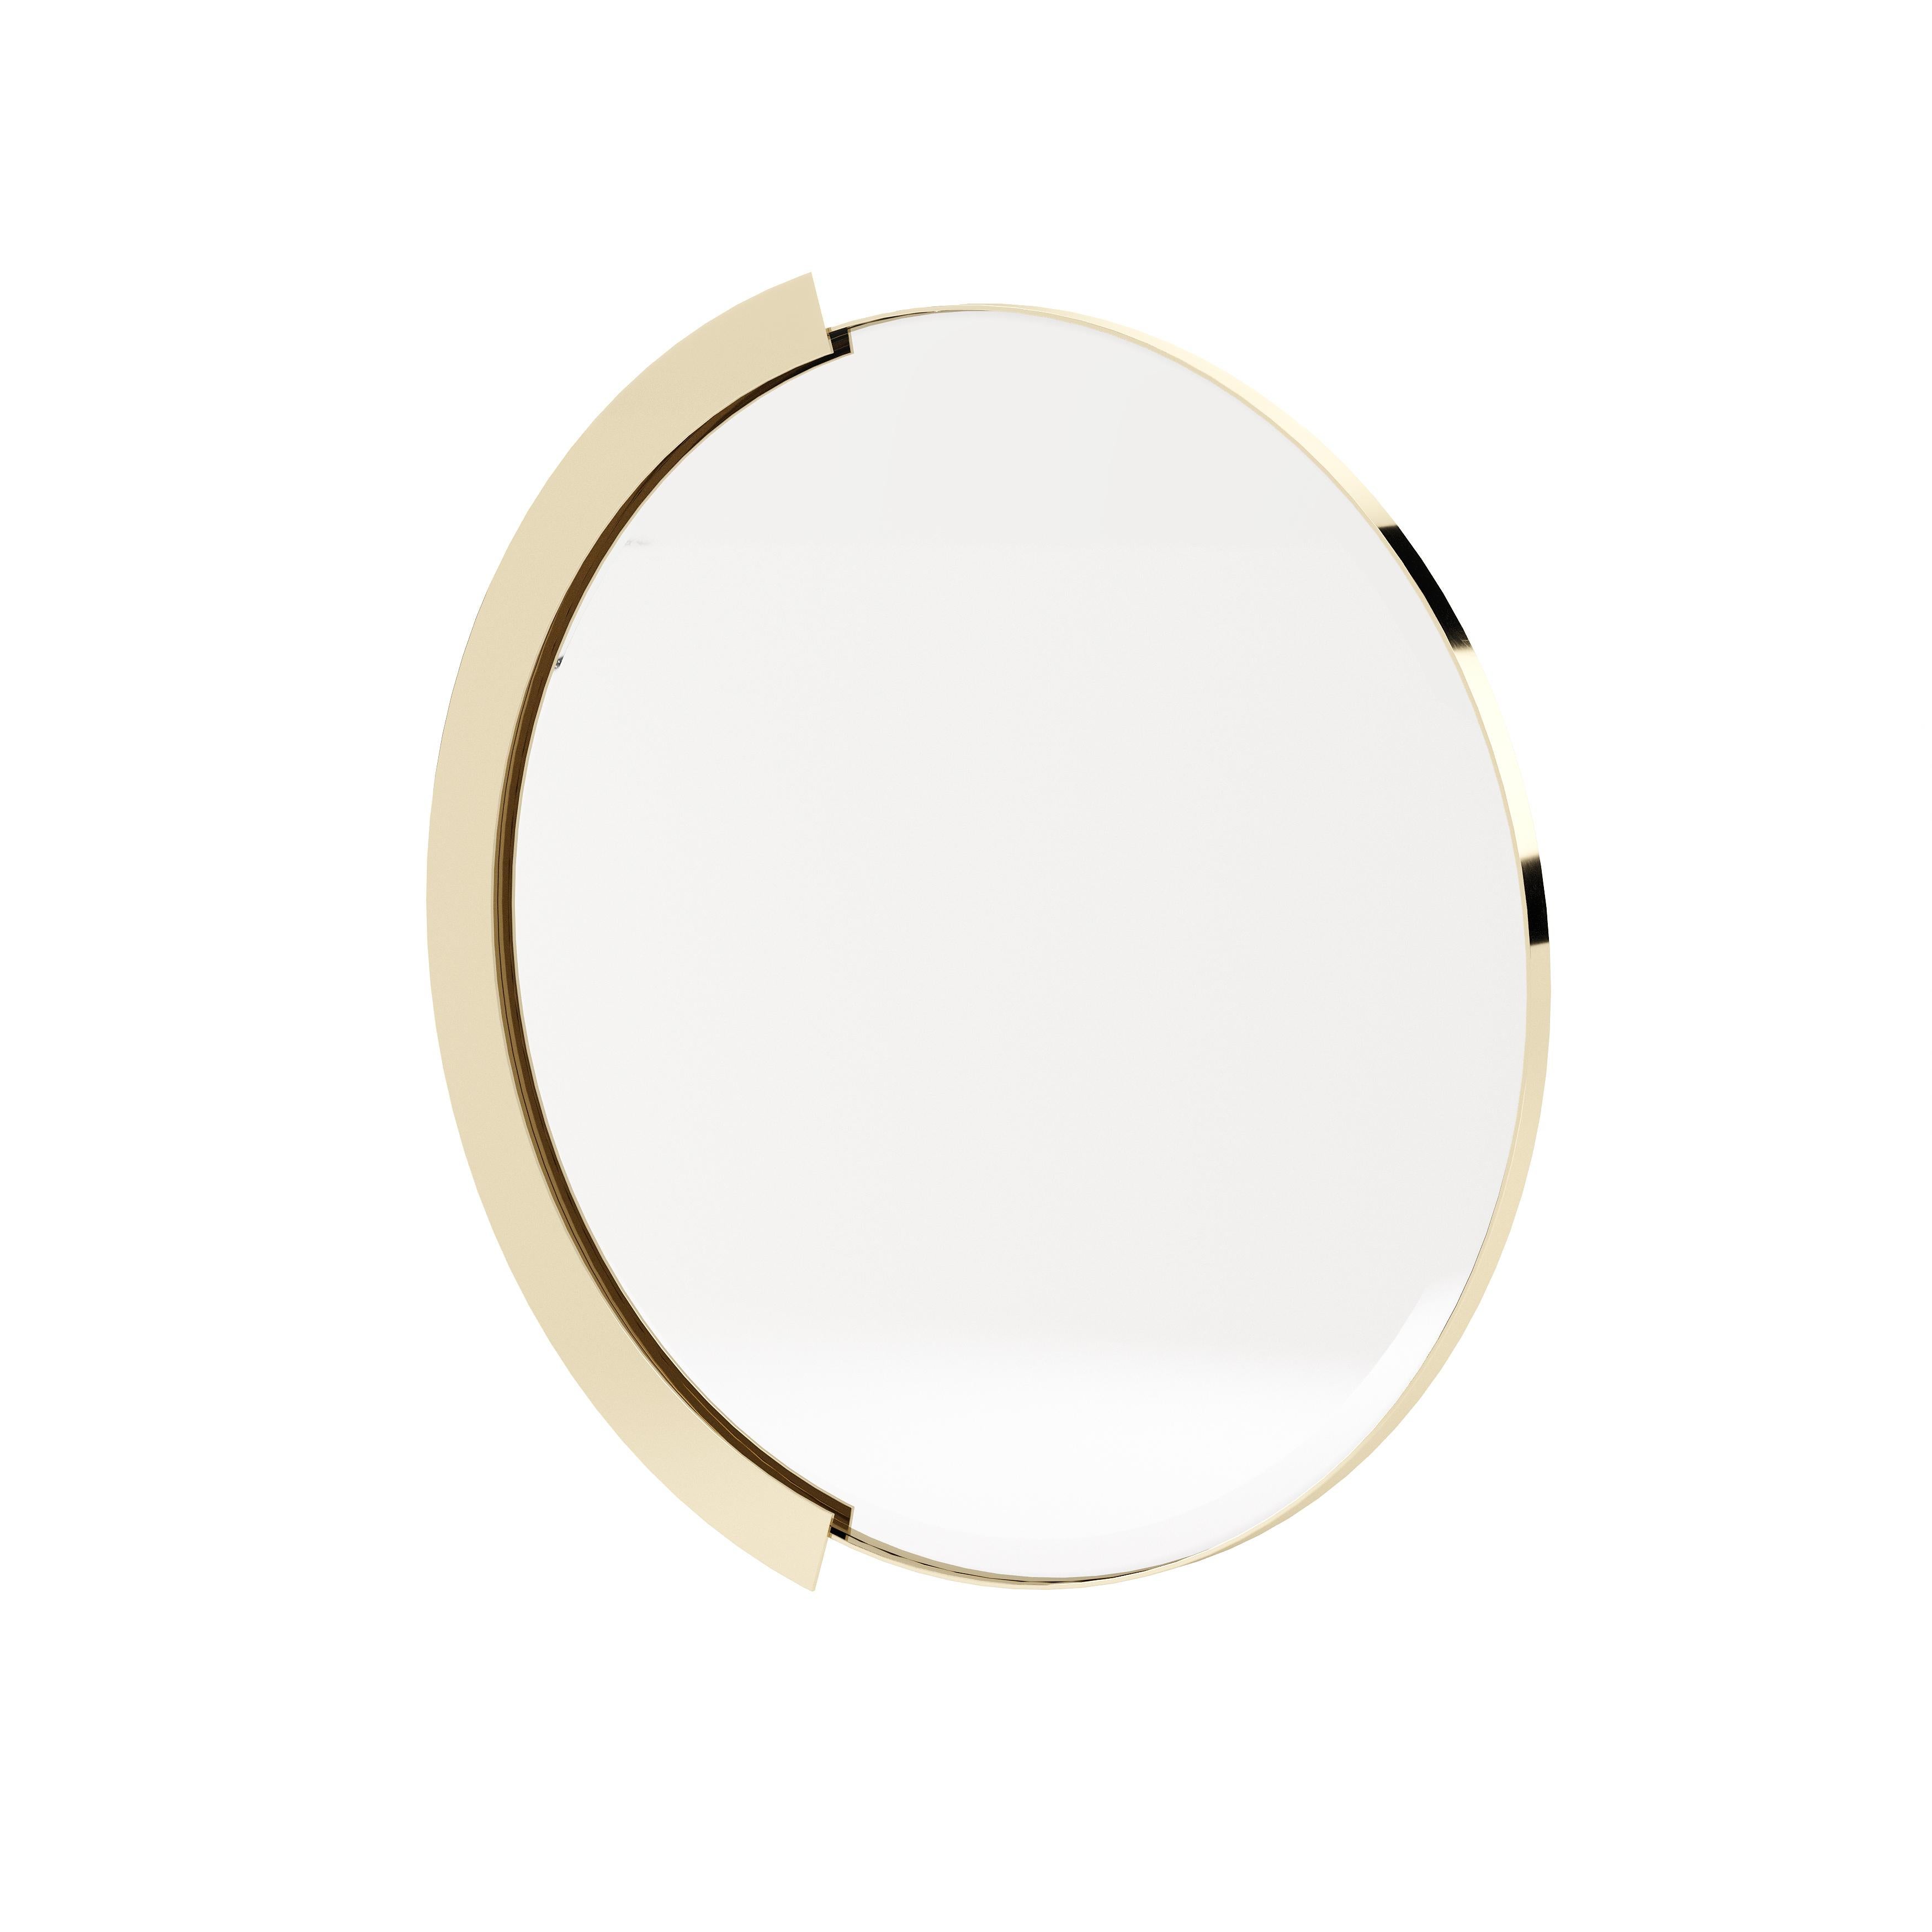 Phill mirror is a modern interpretation of the mid-century style. Playing with dimensions and shapes, it’s a fun addition to your decor with a glamorous touch. Crafted with a stainless steel frame, Phill is a rich element to any interior design